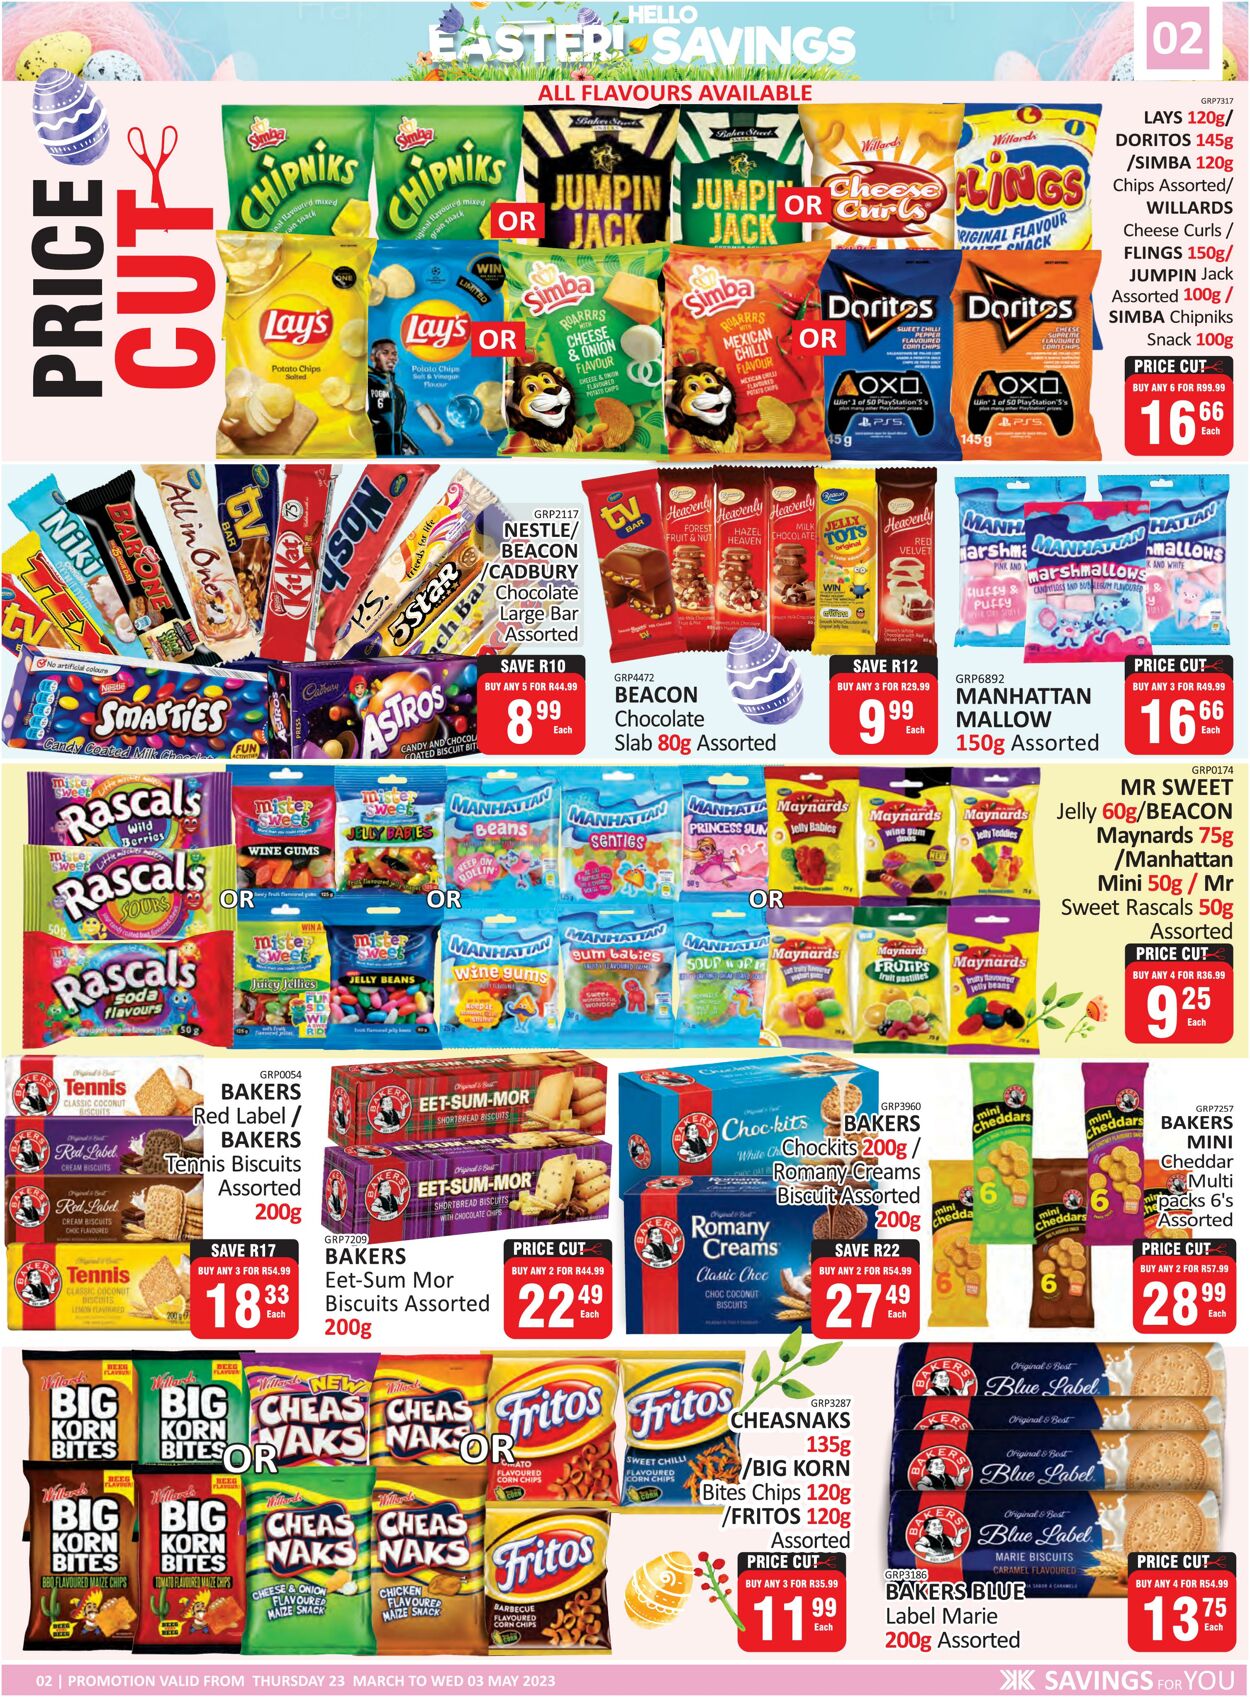 Special Kit Kat Cash and Carry 23.03.2023 - 03.05.2023